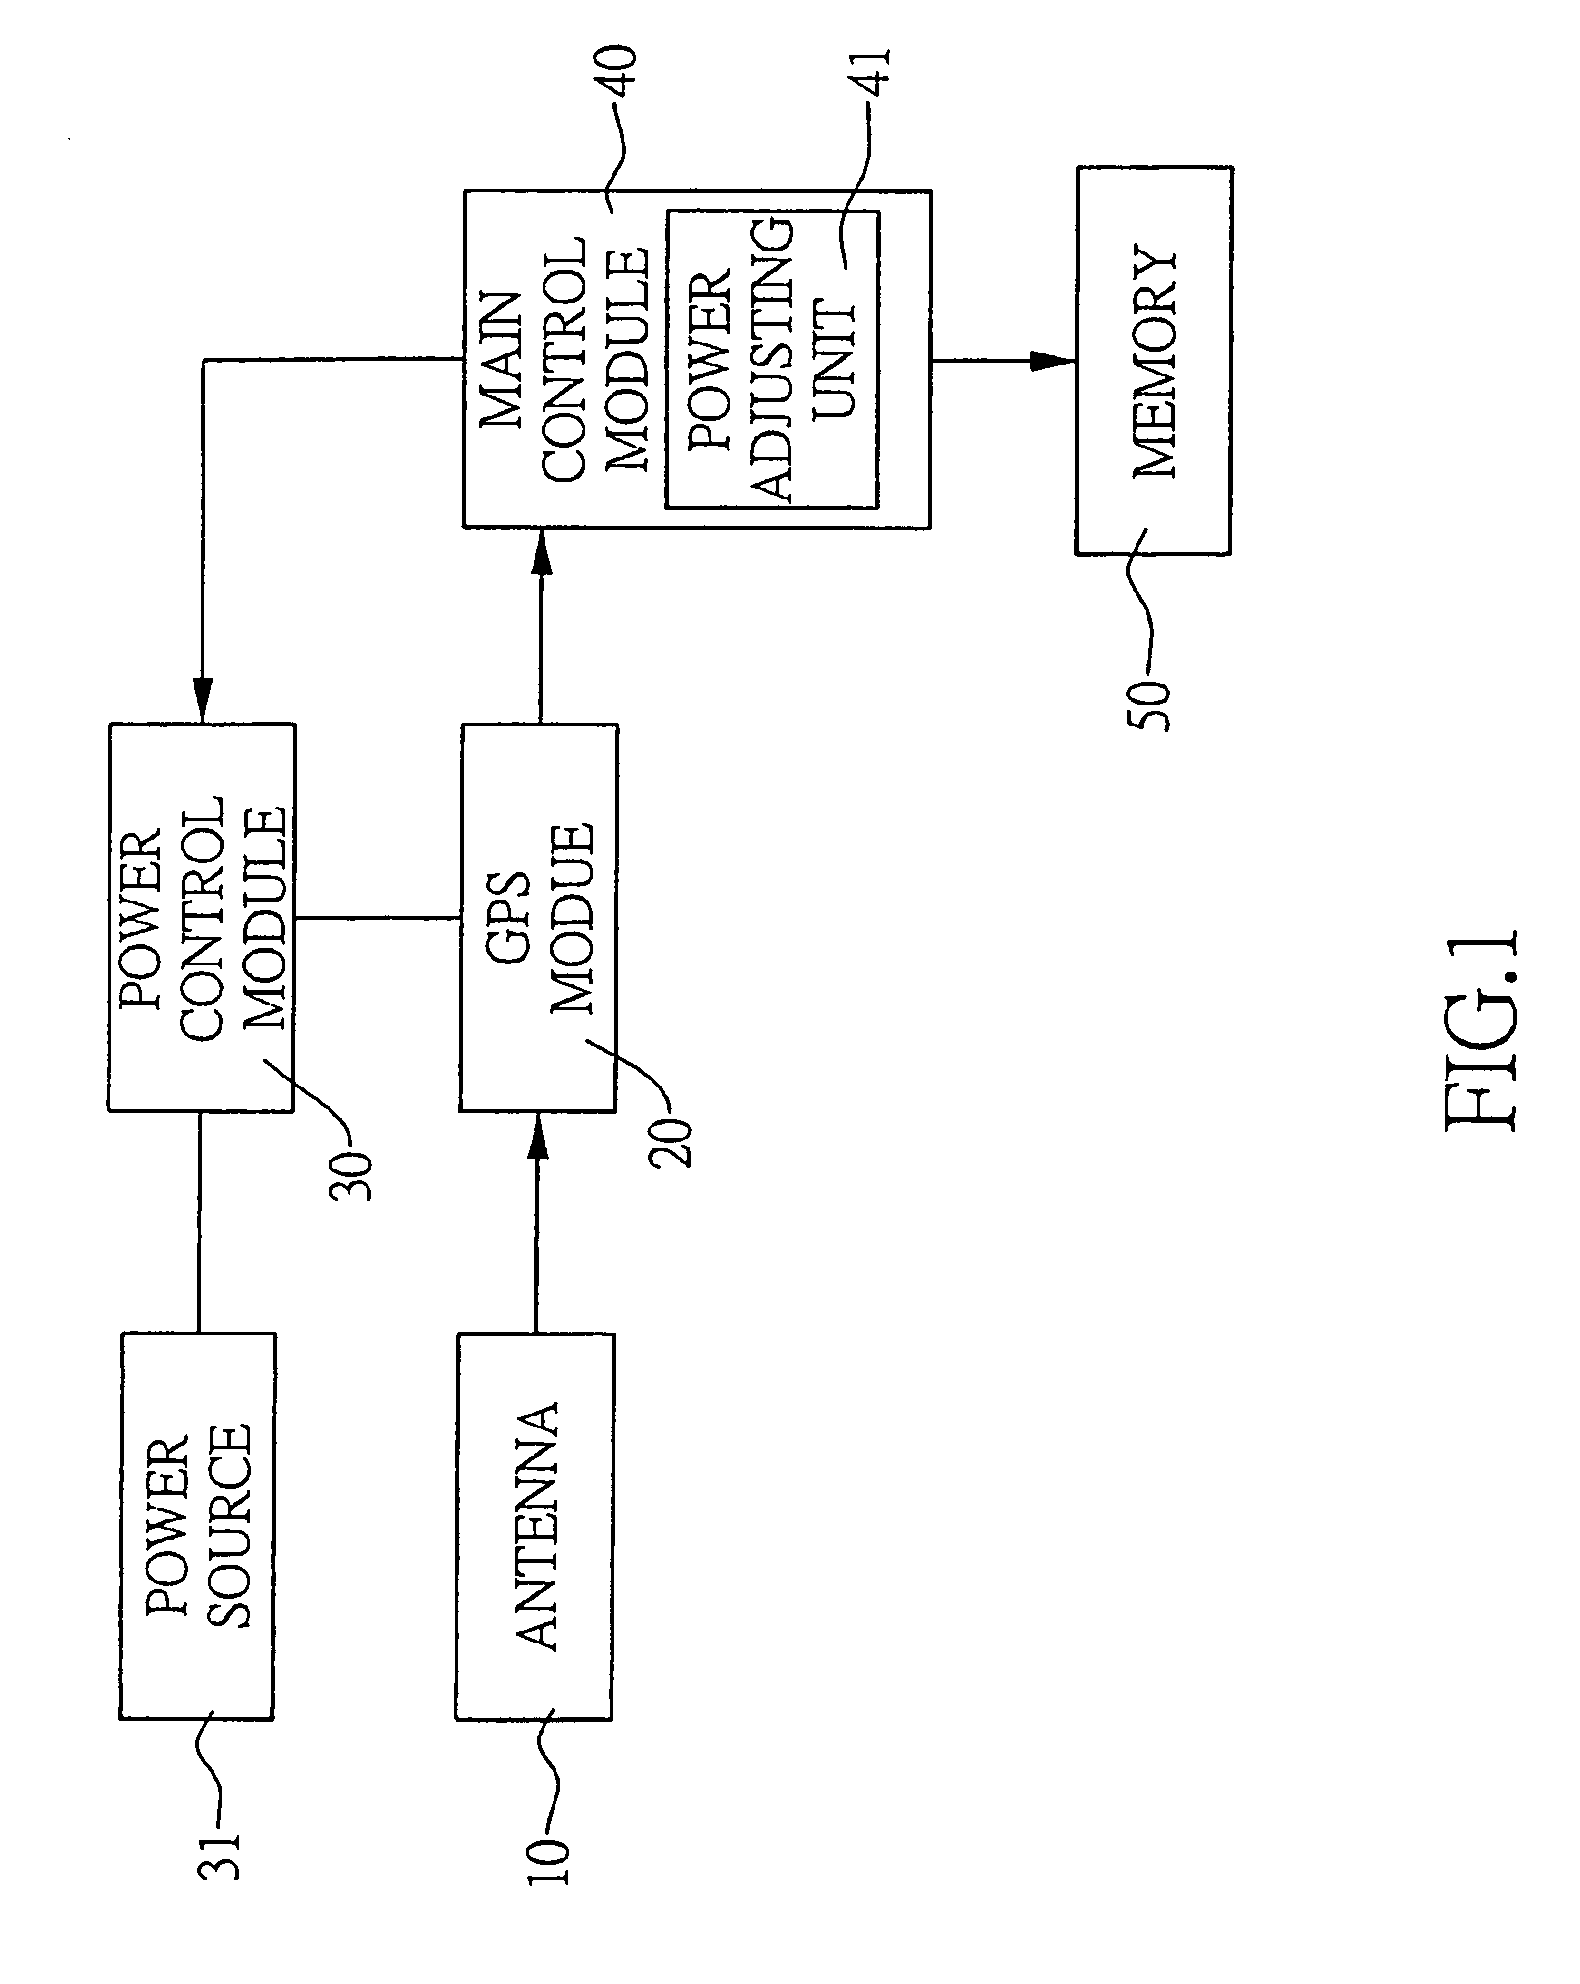 Global positioning system log with low power consumption